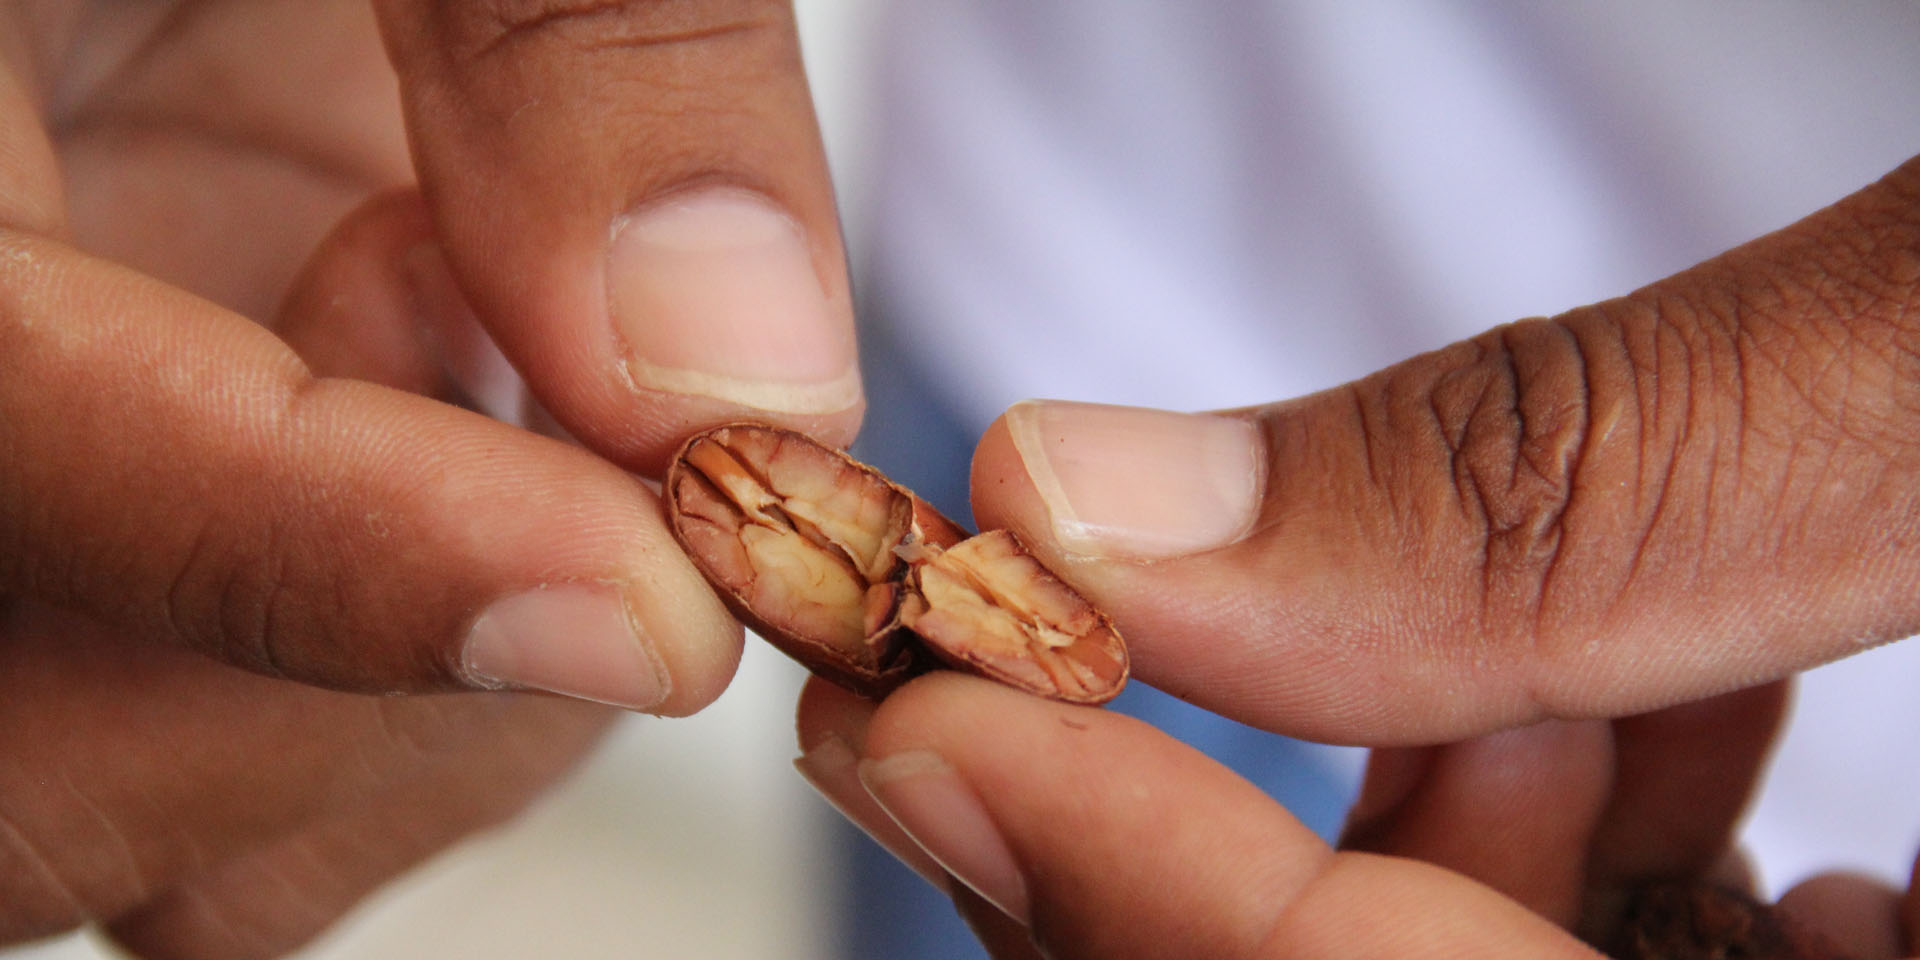 A close-up image of hands breaking apart a cocoa bean.